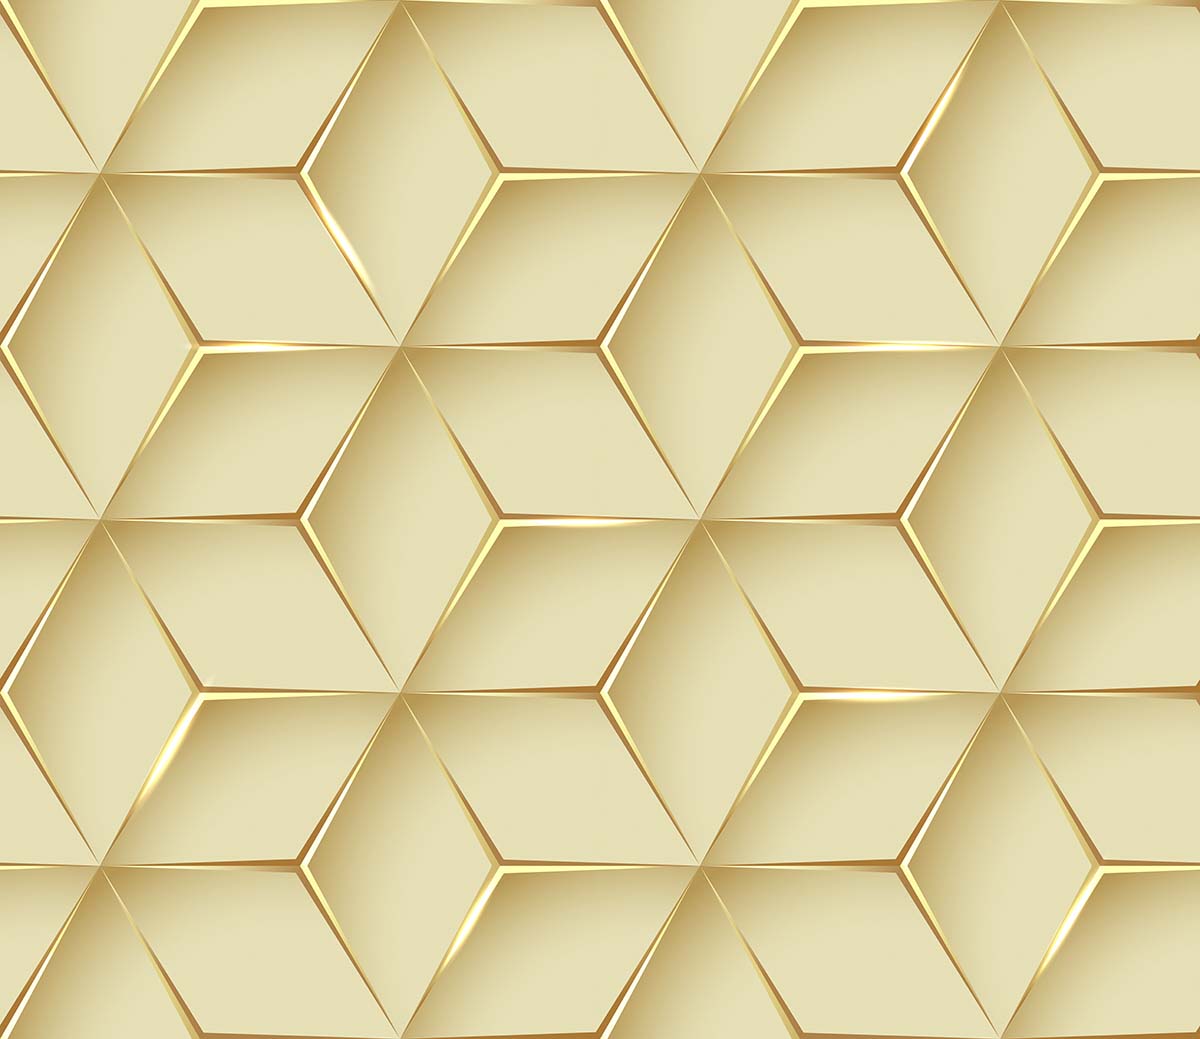 A pattern of white and gold cubes